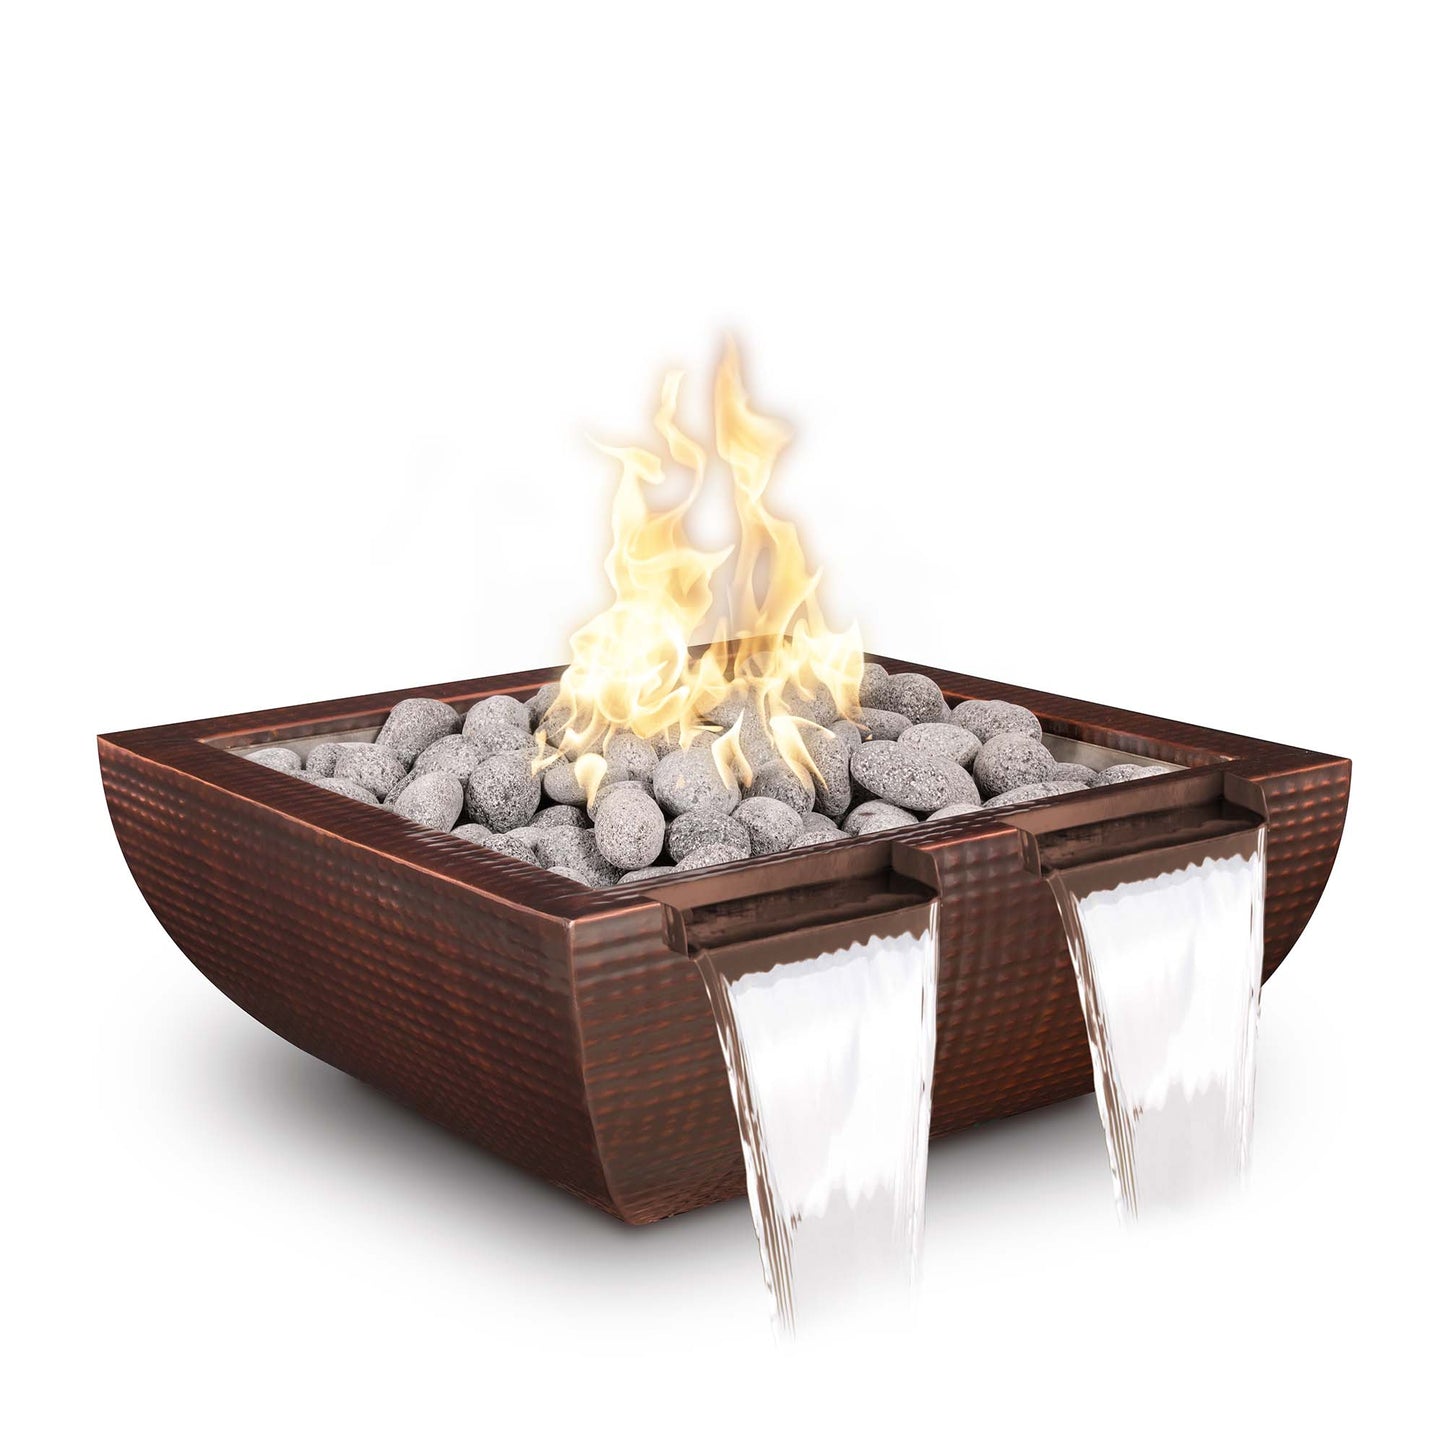 The Outdoor Plus Avalon Twin Spill 24" Black Powder Coated Metal Natural Gas Fire & Water Bowl with Match Lit Ignition